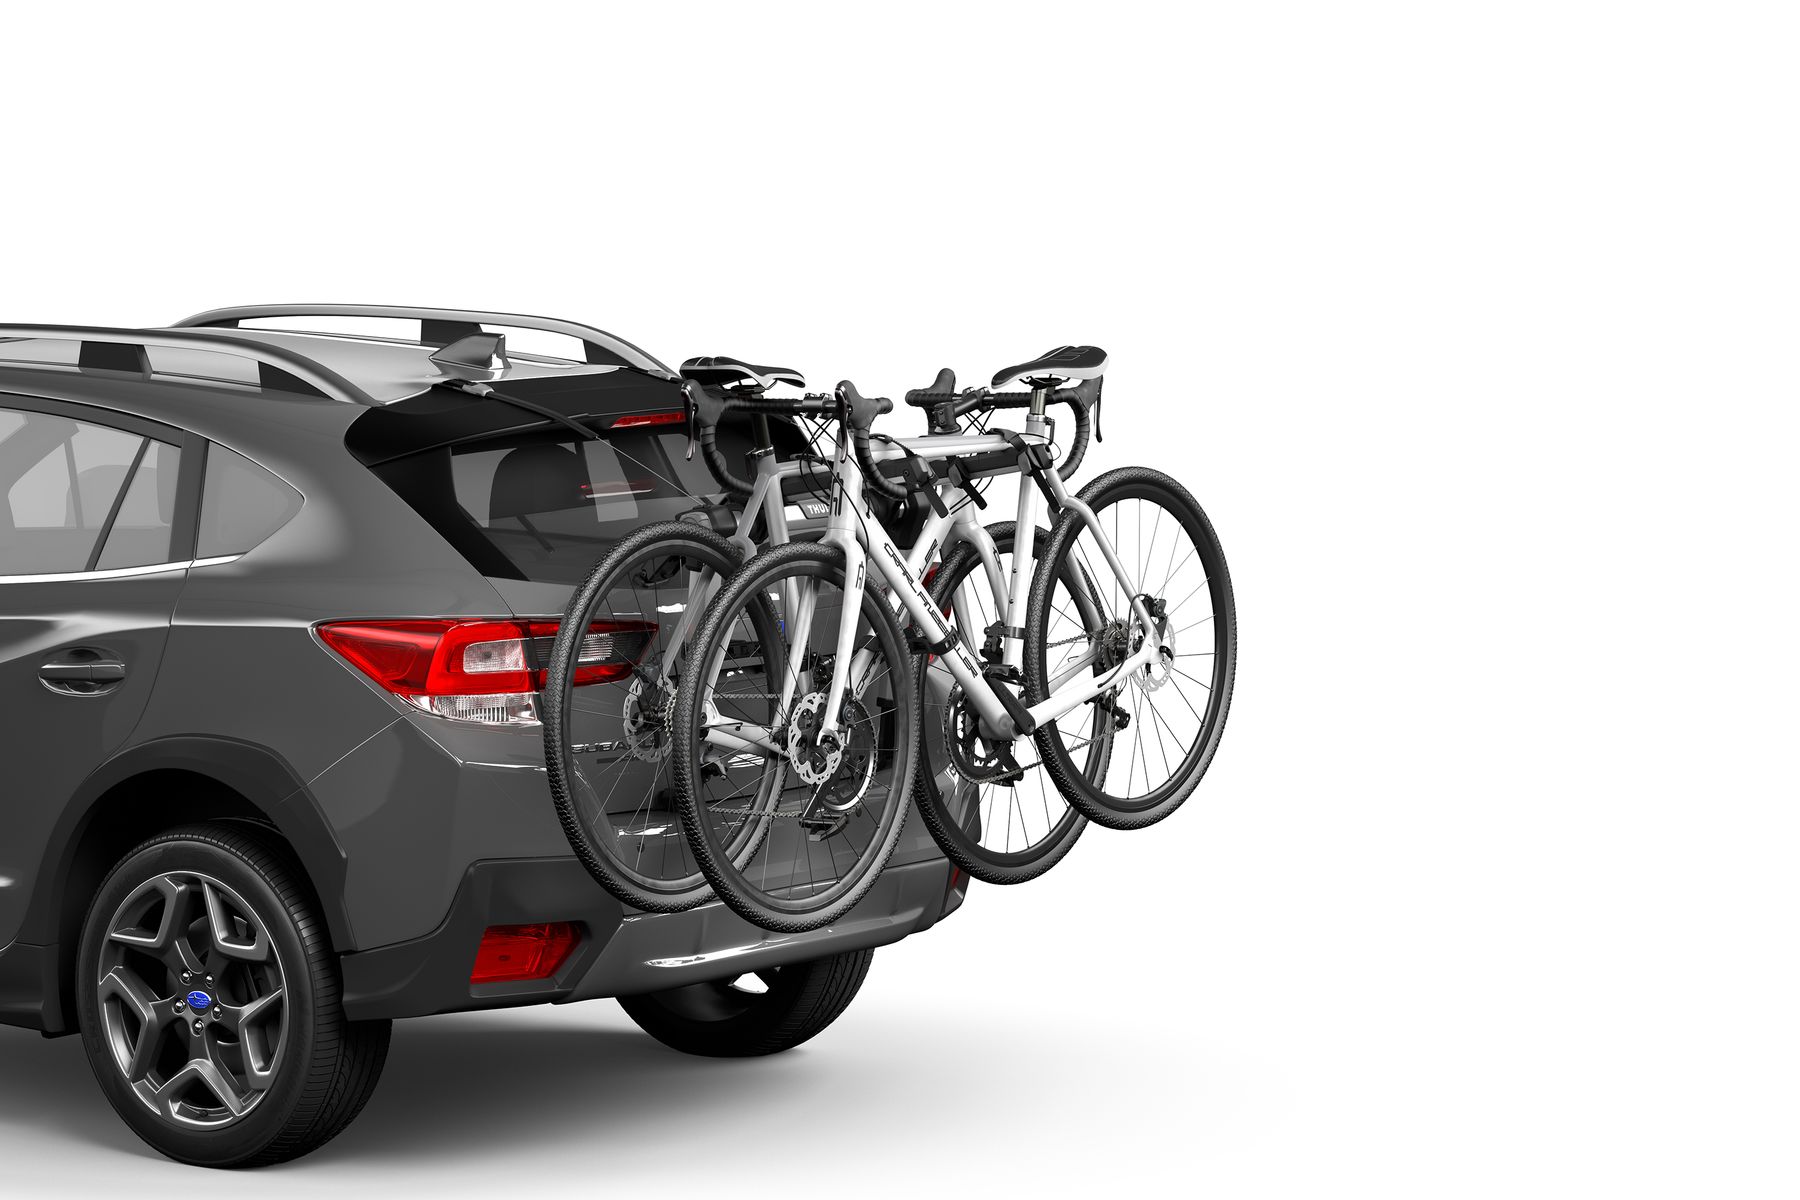 Free Shipping Trunk Mount Bike Rack for 2 Bikes Fits most vehicles 